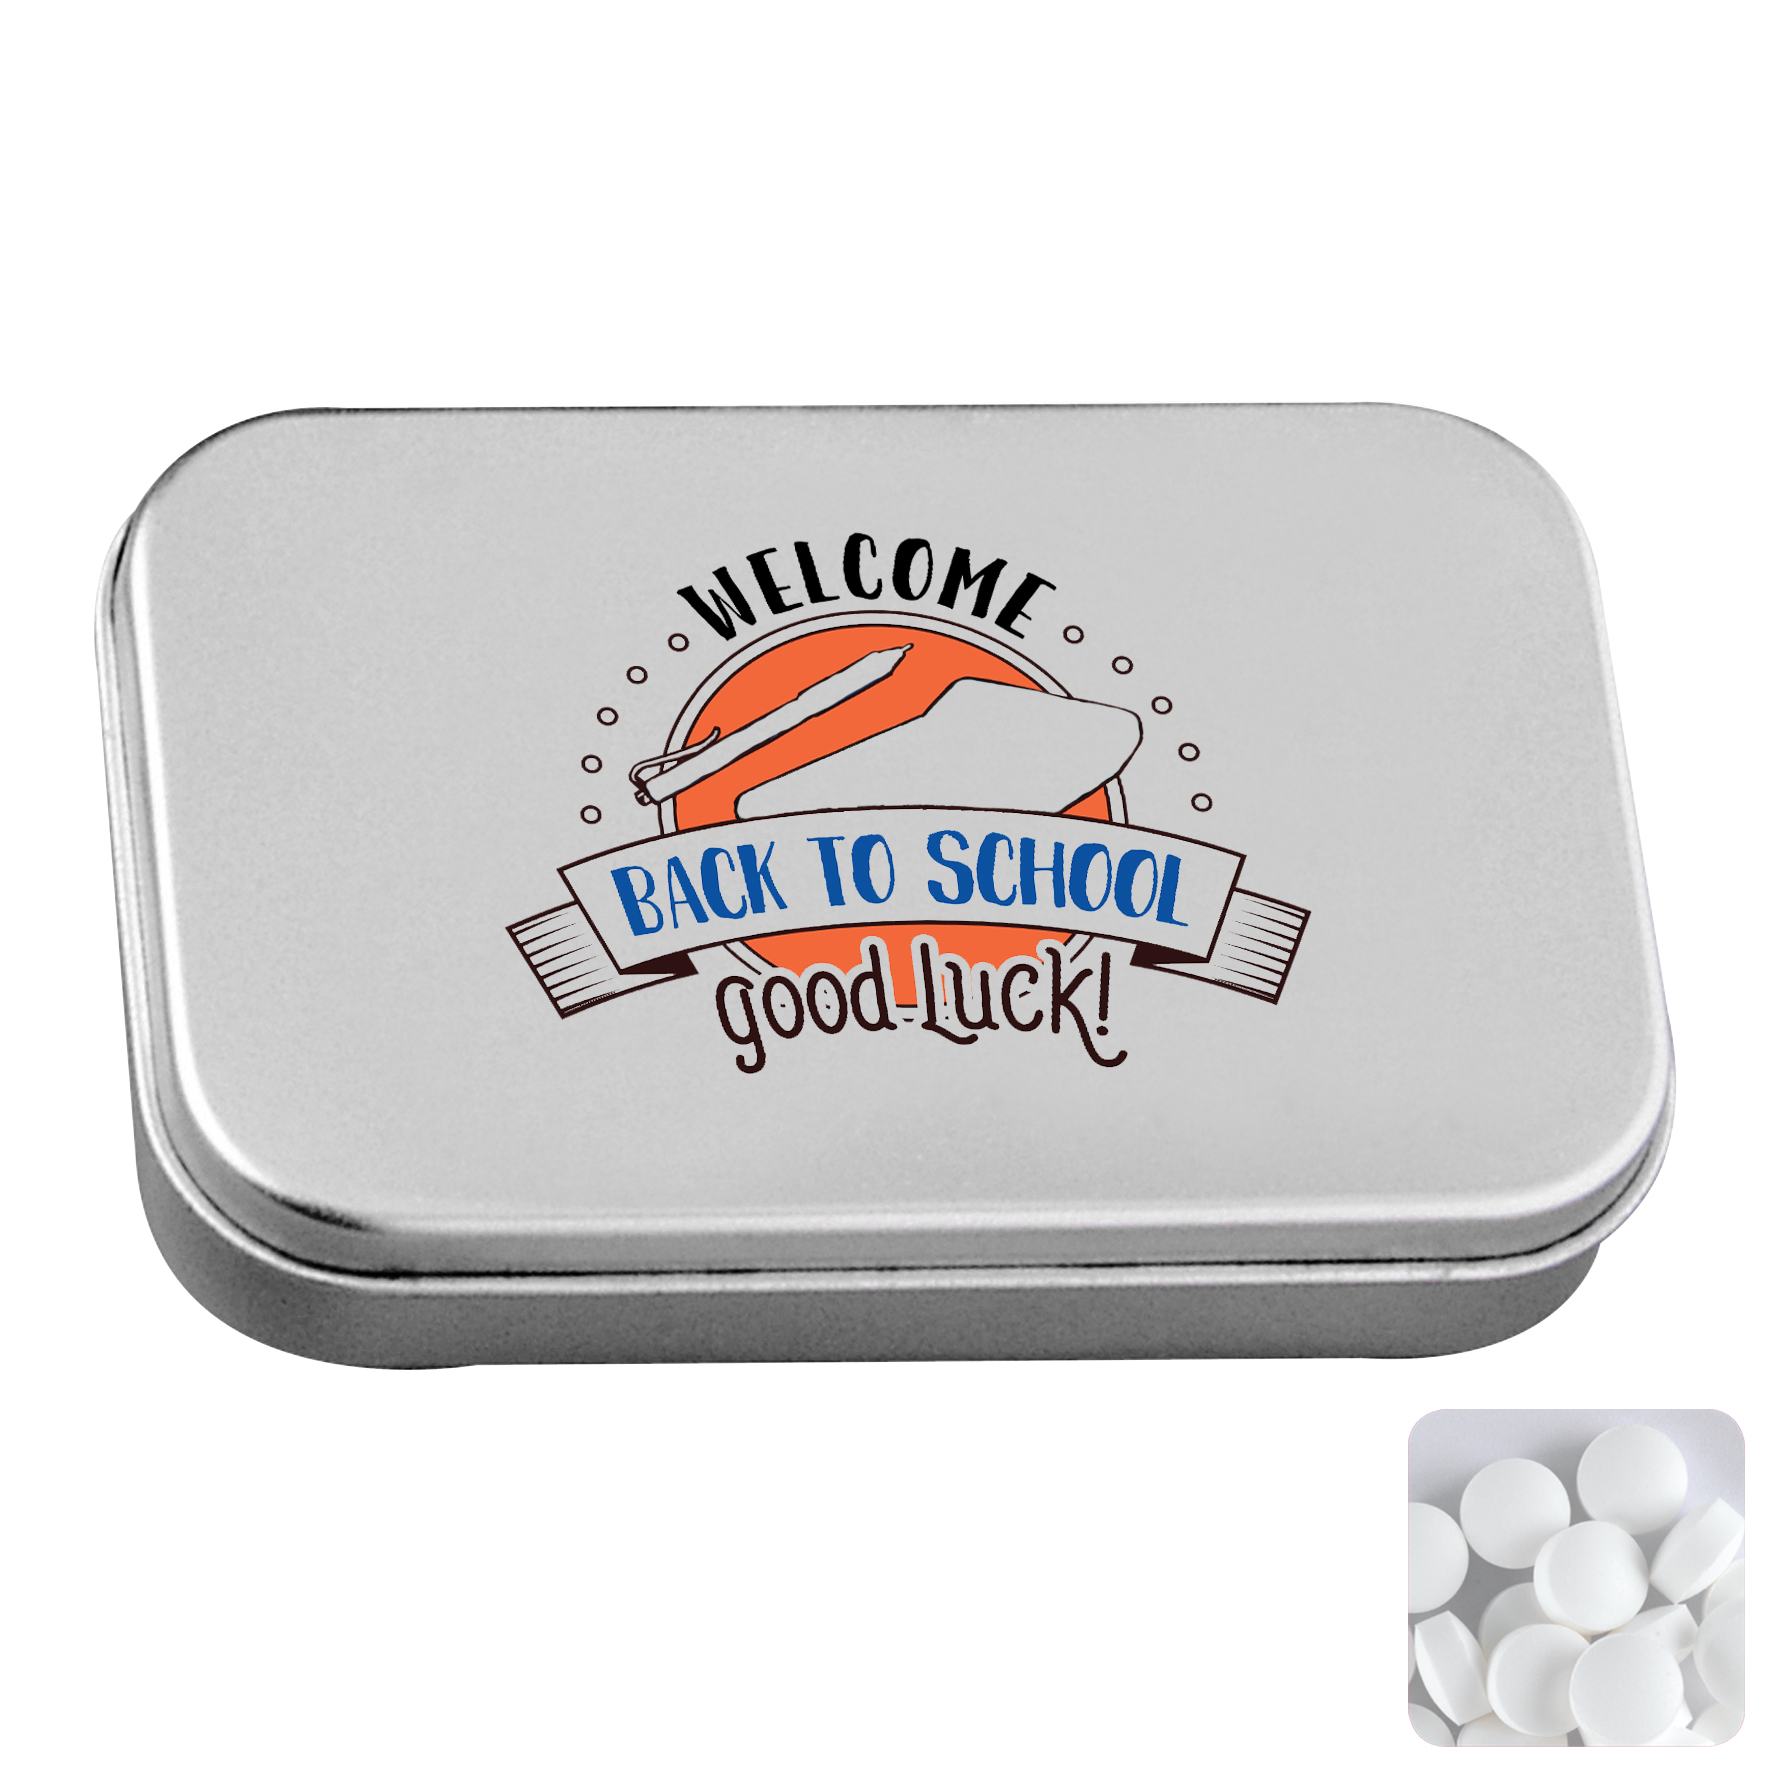 c 0101dmi 32 02 - Mini hinged mint tin with extra strong mints